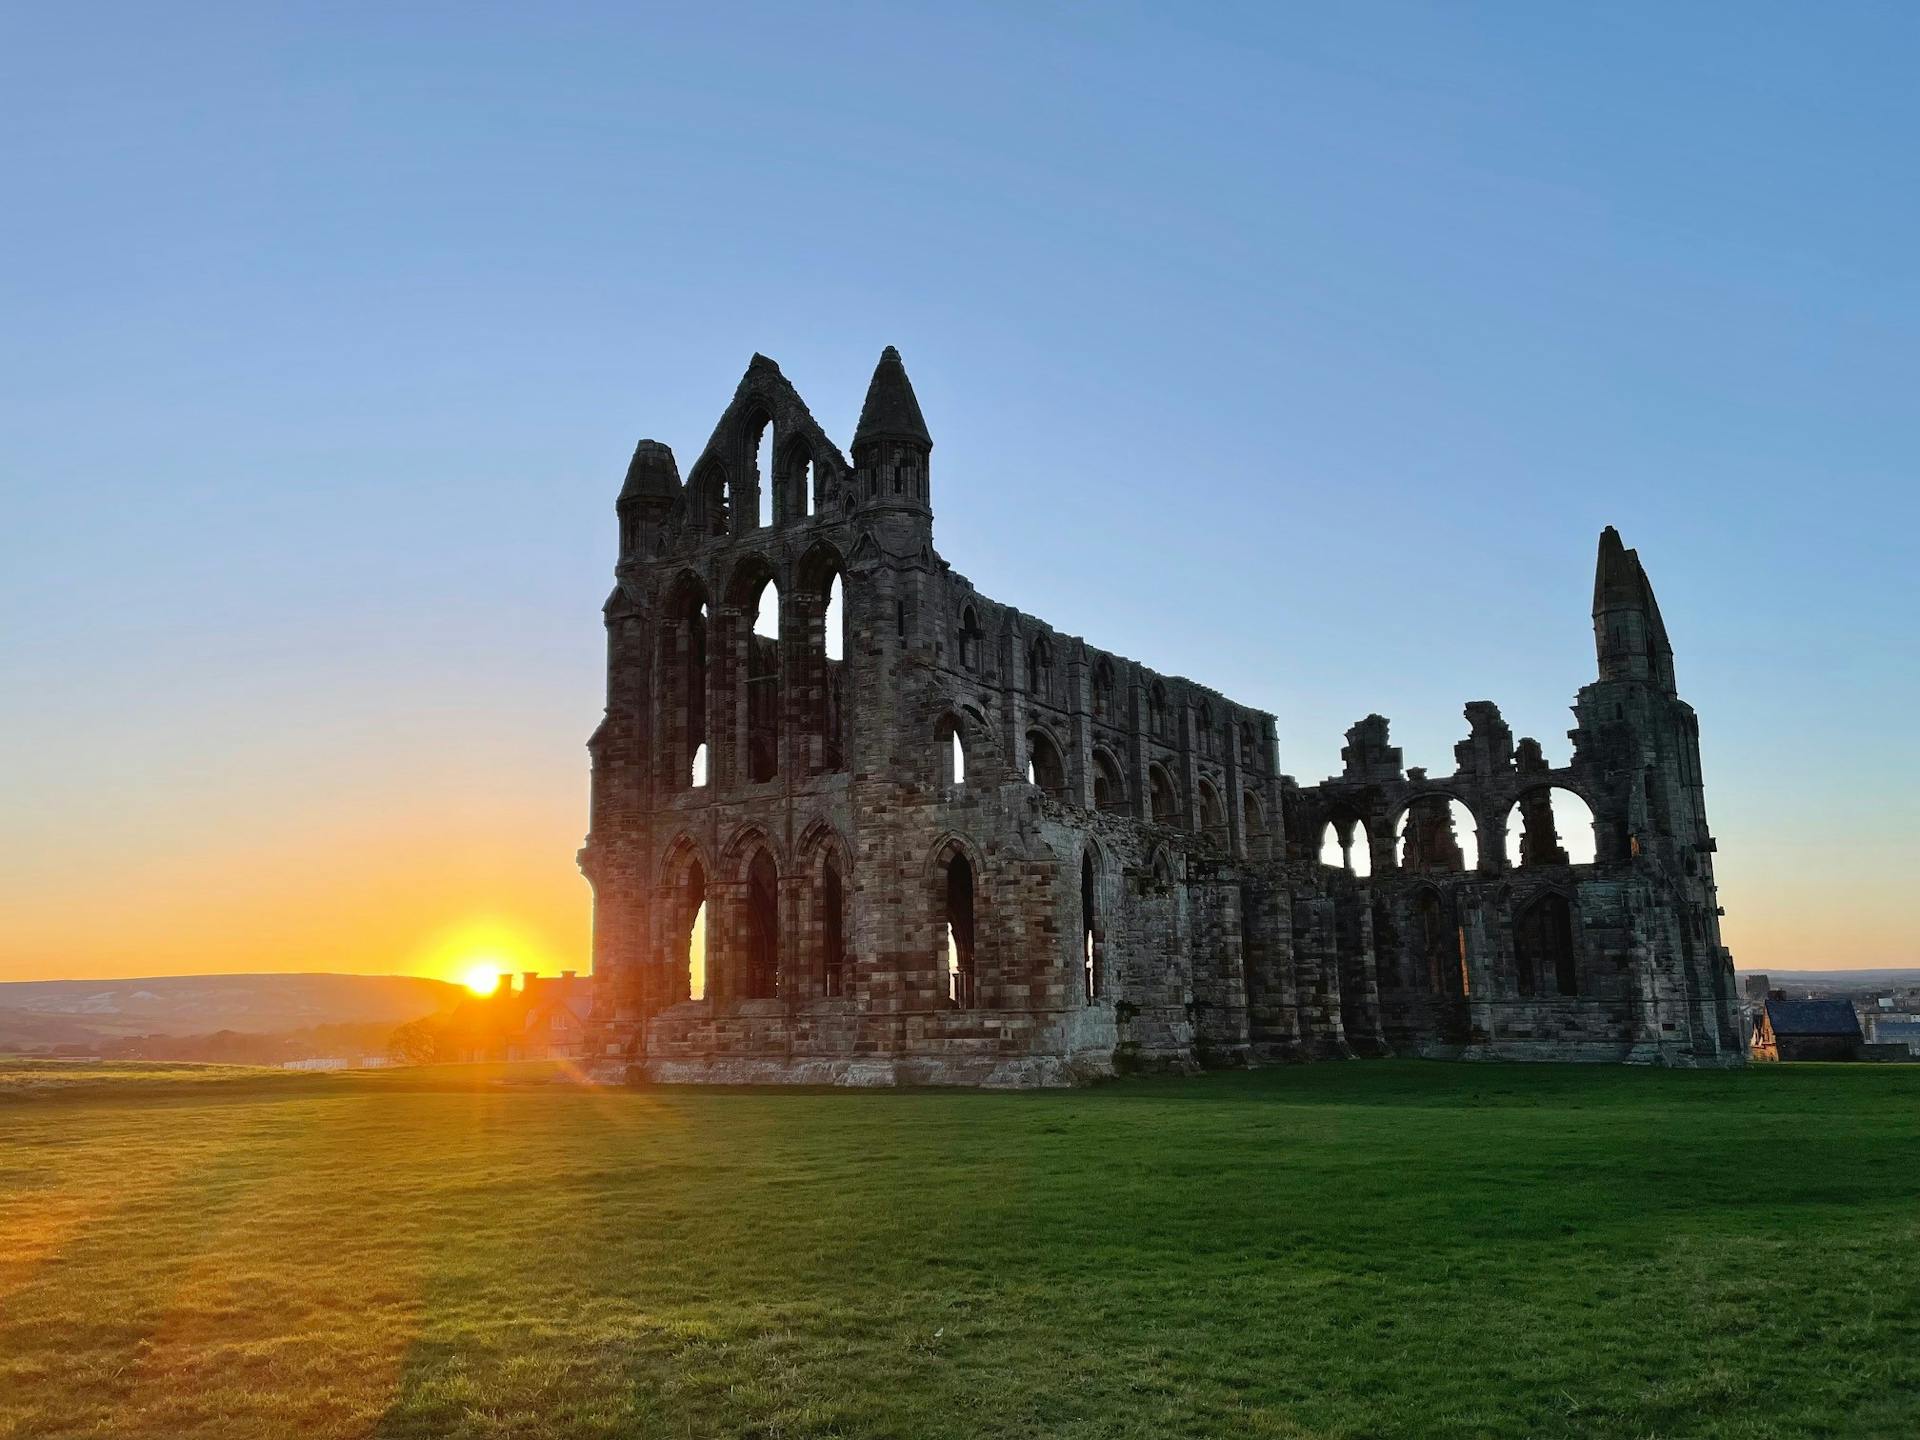 <p>Whitby Abbey and Dracula have a fascinating relationship that spans over a century. Here is some extensive information on how the abbey inspired Bram Stoker to write his famous novel, and how the novel influenced the abbey and the town of Whitby.</p><p><br></p><p><strong>Bram Stoker’s visit to Whitby</strong></p><p>Bram Stoker, an Irish writer and theatre manager, visited Whitby in July 1890, looking for a quiet place to relax and work on his new story. He stayed at a guesthouse on Royal Crescent, where he had a view of the abbey and the church on the cliff. He was captivated by the Gothic atmosphere of the town, and explored its history, legends, and folklore.</p><p><br></p><p>He also visited the public library, where he found a book called An Account of the Principalities of Wallachia and Moldavia, which introduced him to the name and deeds of Vlad the Impaler, a 15th-century prince of Wallachia who was notorious for his cruelty and bloodthirstiness. Stoker decided to use Vlad’s surname, Dracula, which means <em>son of the dragon</em> or <em>son of the devil</em>, for his main character, who was originally called Count Wampyr.</p><p><br></p><p><strong>Dracula’s arrival in Whitby</strong></p><p>Stoker incorporated many elements of Whitby into his novel, which was published in 1897. The most dramatic scene is when Dracula arrives in Whitby on a Russian ship called the Demeter, which is carrying 50 boxes of earth from Transylvania. The ship is caught in a storm and runs aground on Tate Hill Sands, near the harbour.</p><p><br></p><p>The only survivor is the captain, who is found tied to the wheel with a crucifix in his hand. A large black dog, which is Dracula in disguise, leaps from the ship and runs up the 199 steps to the abbey. He then finds a lair in the ruins, where he hides some of his coffins.</p><p><br></p><p><strong>Dracula’s victims in Whitby</strong></p><p>Dracula begins to prey on the people of Whitby, starting with a local old man named Swales, whose name Stoker borrowed from a gravestone in the churchyard. He then targets Lucy Westenra, a young woman who is staying with her friend Mina Murray at a house on the Crescent. Lucy sleepwalks at night and wanders to the churchyard, where Dracula bites her and drains her blood.</p><p><br></p><p>Mina notices Lucy’s pale and weak condition, and also sees a strange red mark on her neck. Lucy eventually dies and becomes a vampire herself, but is later destroyed by Van Helsing and his companions. Mina is also attacked by Dracula, who forces her to drink his blood and creates a psychic bond between them. This bond allows Mina to track Dracula’s movements, and helps the heroes to pursue him back to Transylvania, where they finally kill him.</p><p><br></p><p><strong>Dracula’s legacy in Whitby</strong></p><p>Dracula is one of the most influential and popular novels in the history of literature, and has spawned countless adaptations, sequels, and spin-offs. Whitby has also benefited from its association with Dracula, as it attracts many tourists and fans who want to see the places that inspired Stoker. The abbey, the church, the steps, the harbour, and the museum are some of the main attractions for Dracula enthusiasts.</p><p><br></p><p>Whitby also hosts various events and festivals related to Dracula, such as the Whitby Goth Weekend, the Bram Stoker Film Festival, and the Dracula Experience. Whitby Abbey itself celebrates its connection to Dracula by projecting images of bats on its walls, and by hosting a world record attempt for the largest gathering of people dressed as vampires.</p><p><br></p>